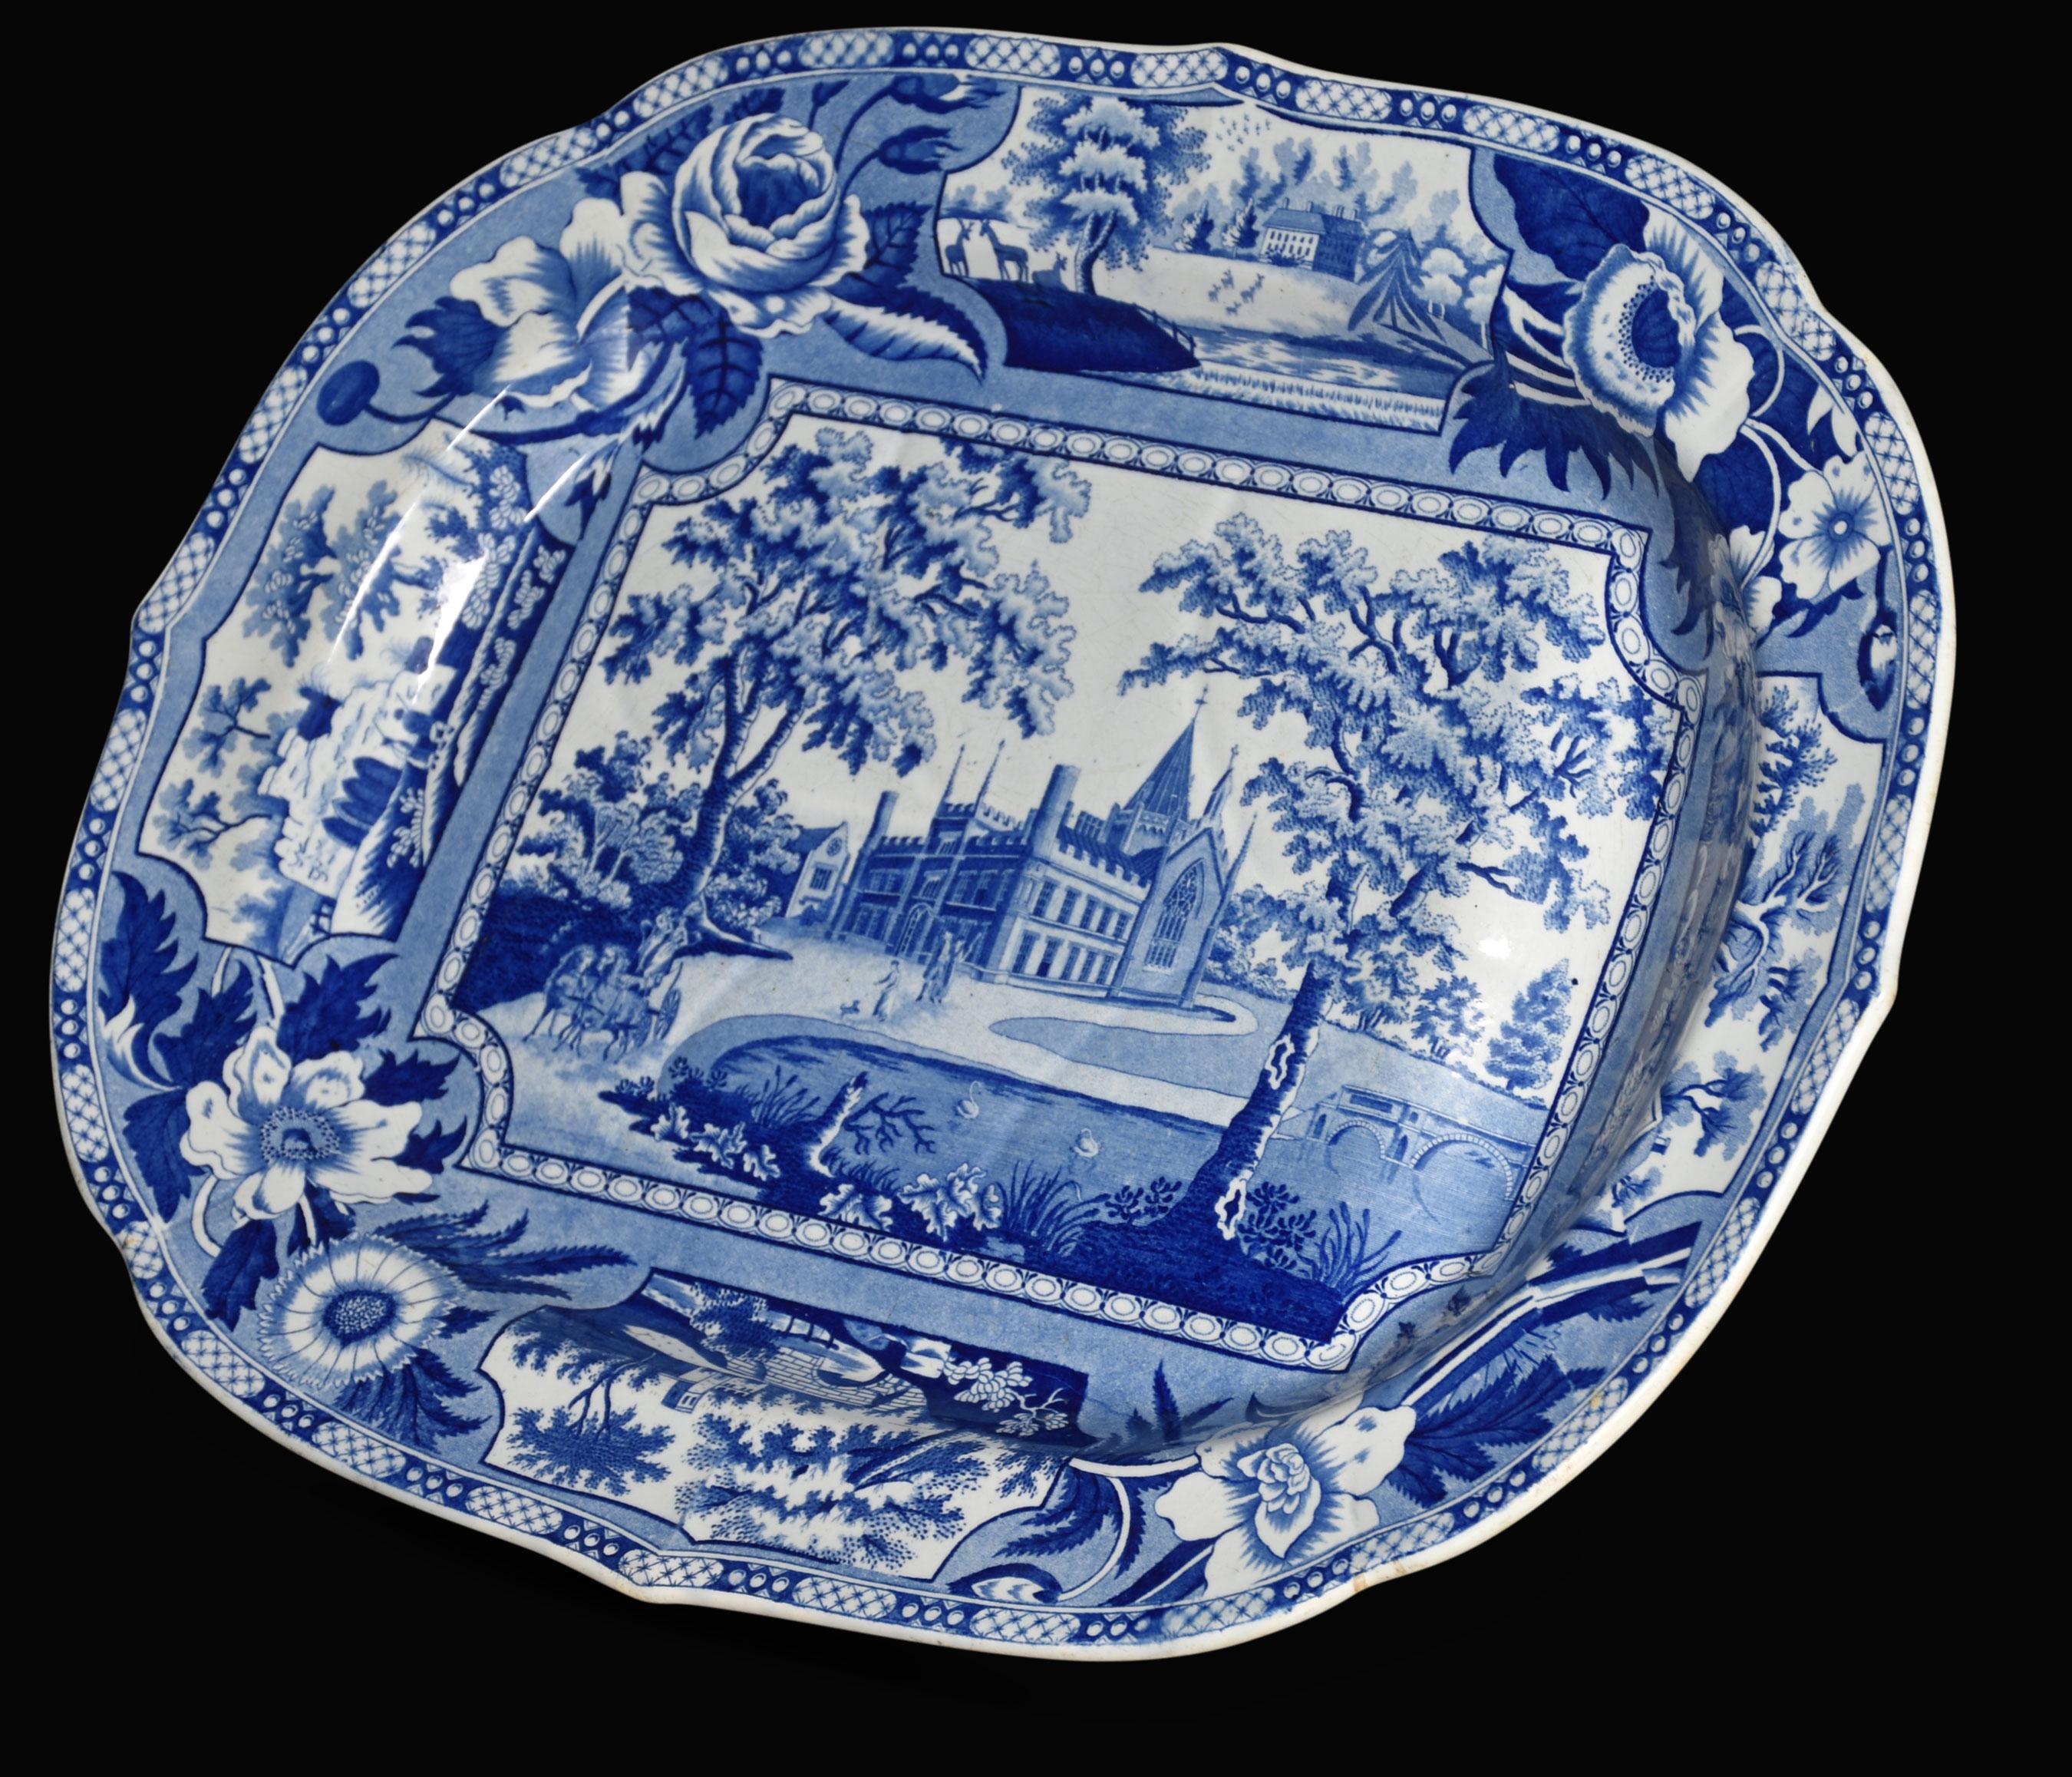 Staffordshire 19th century blue and white meat draining plate.
Dimensions
Height 2.5 inches
Width 20.5 inches
Depth 16 inches.